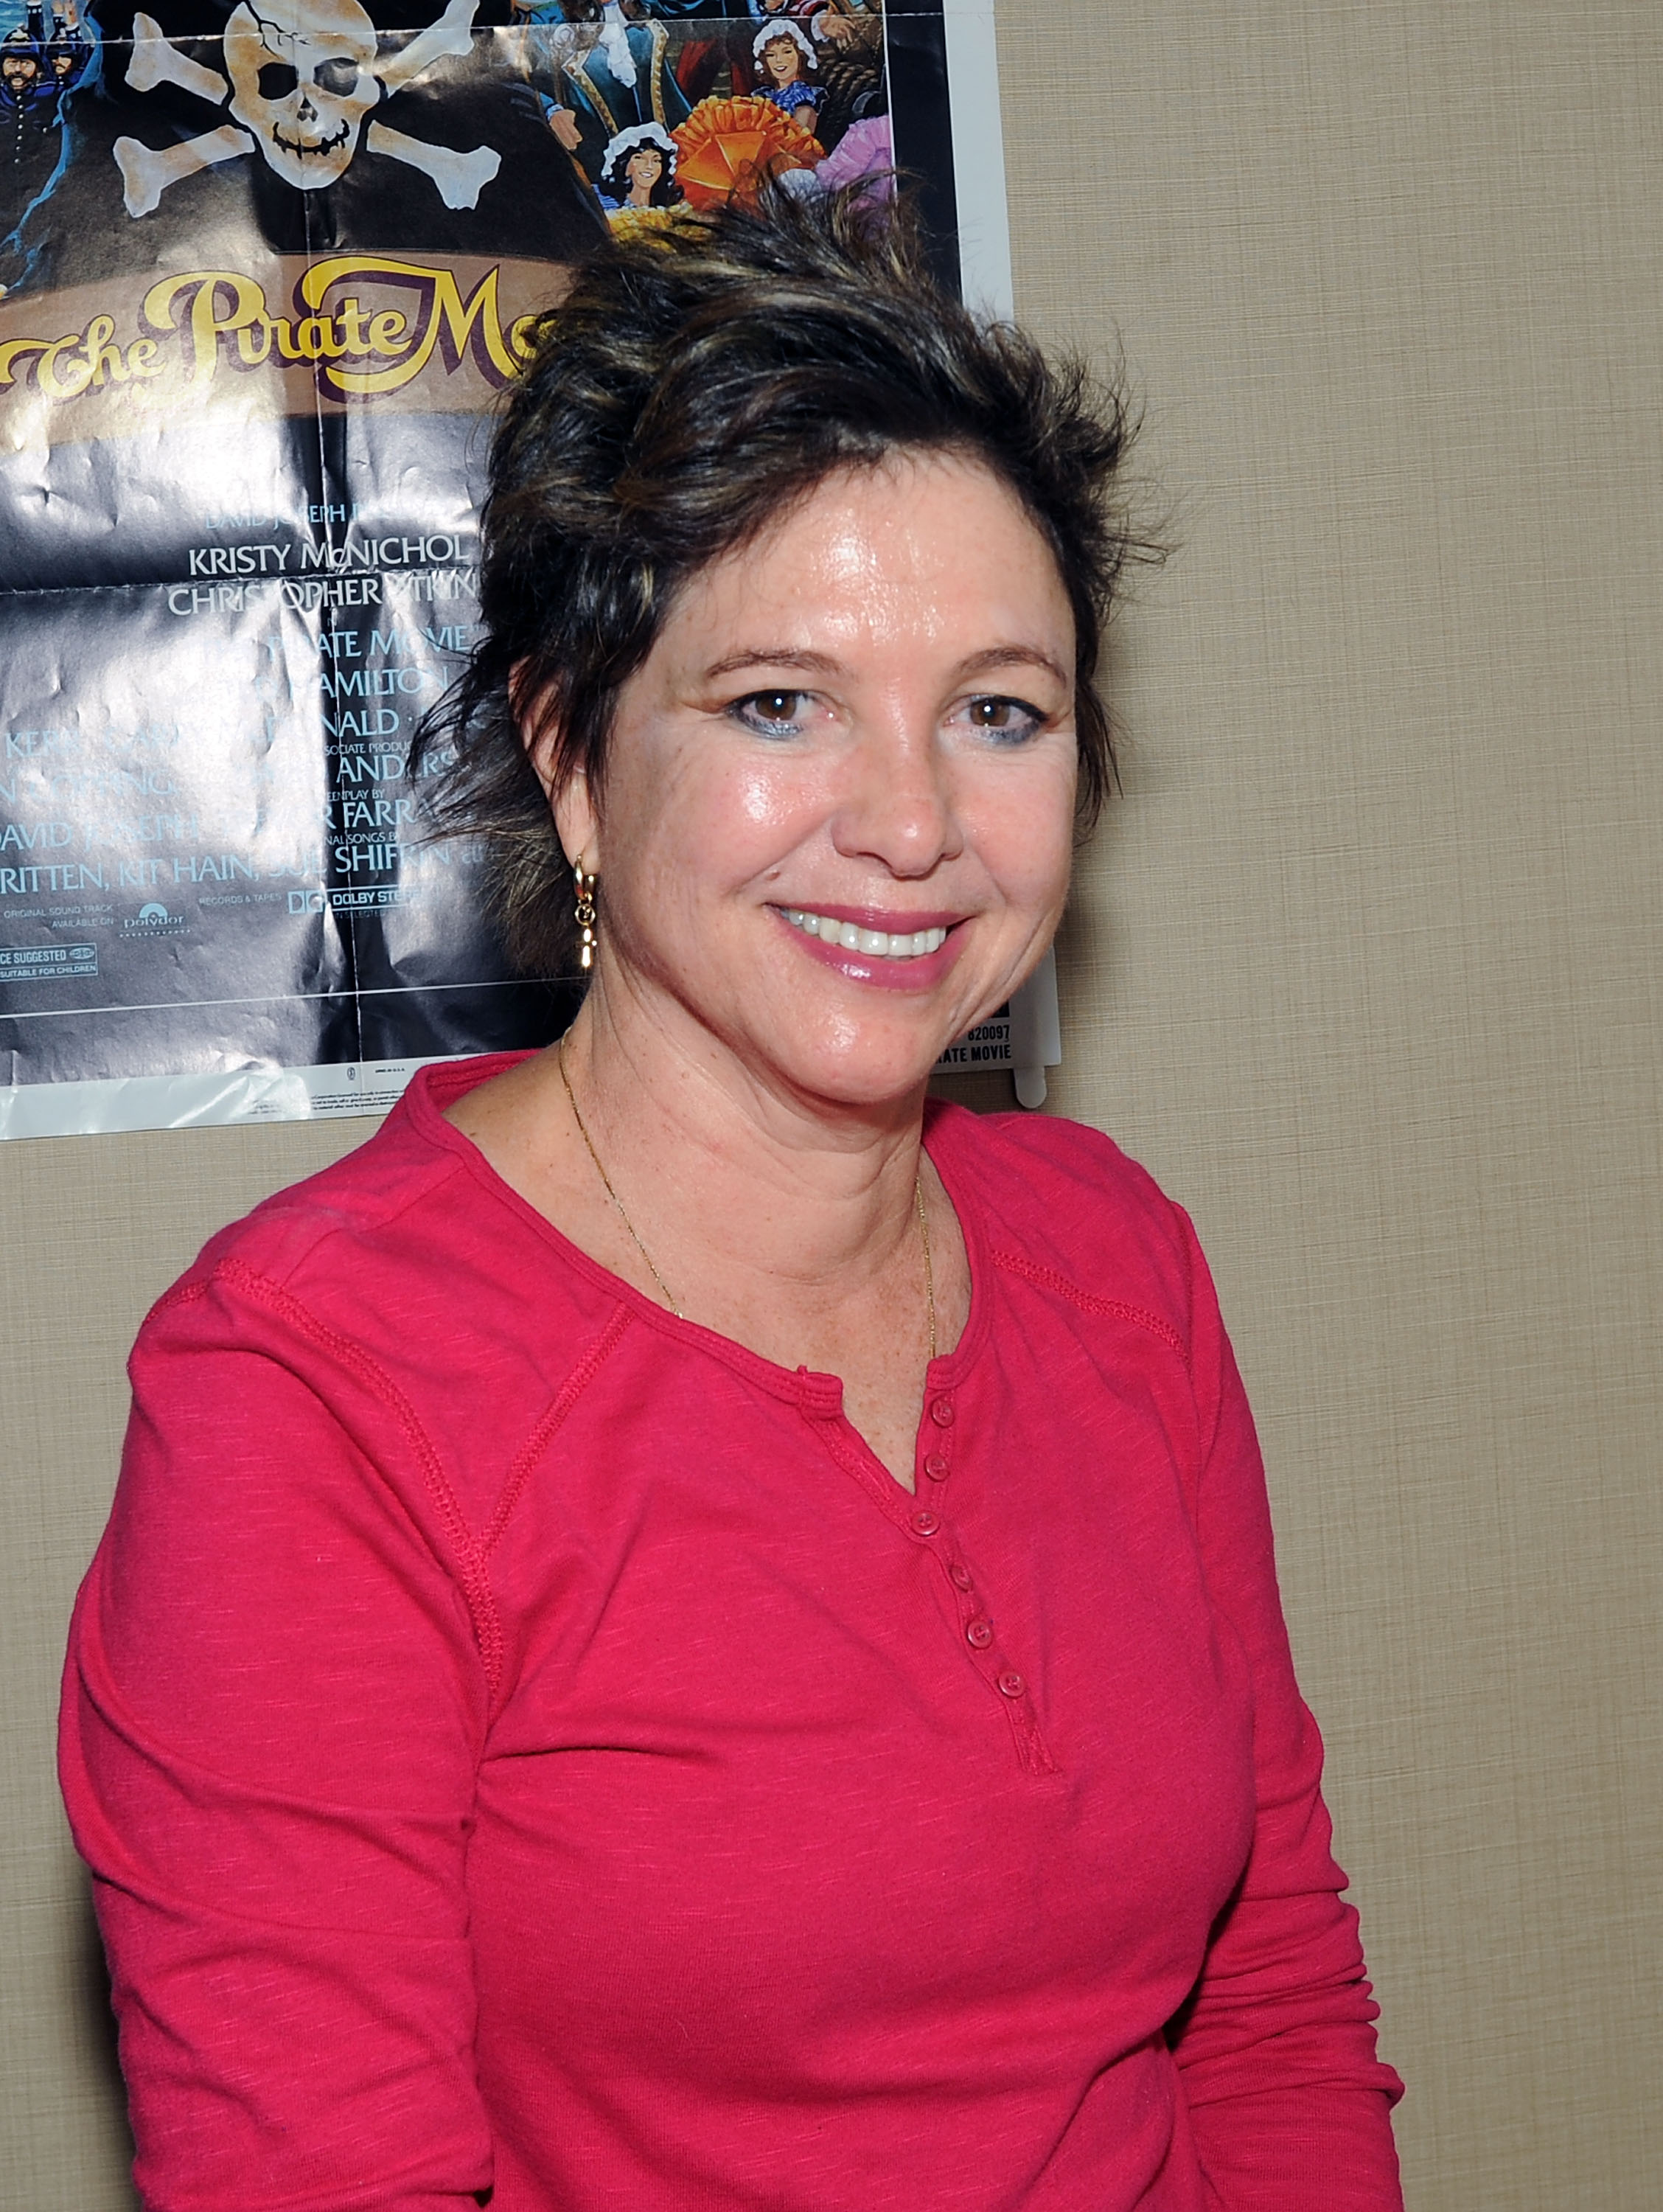 Kristy McNichol attends the 2016 Chiller Theatre Expo Day 1 on October 28, 2016, in New Jersey. | Source: Getty Images